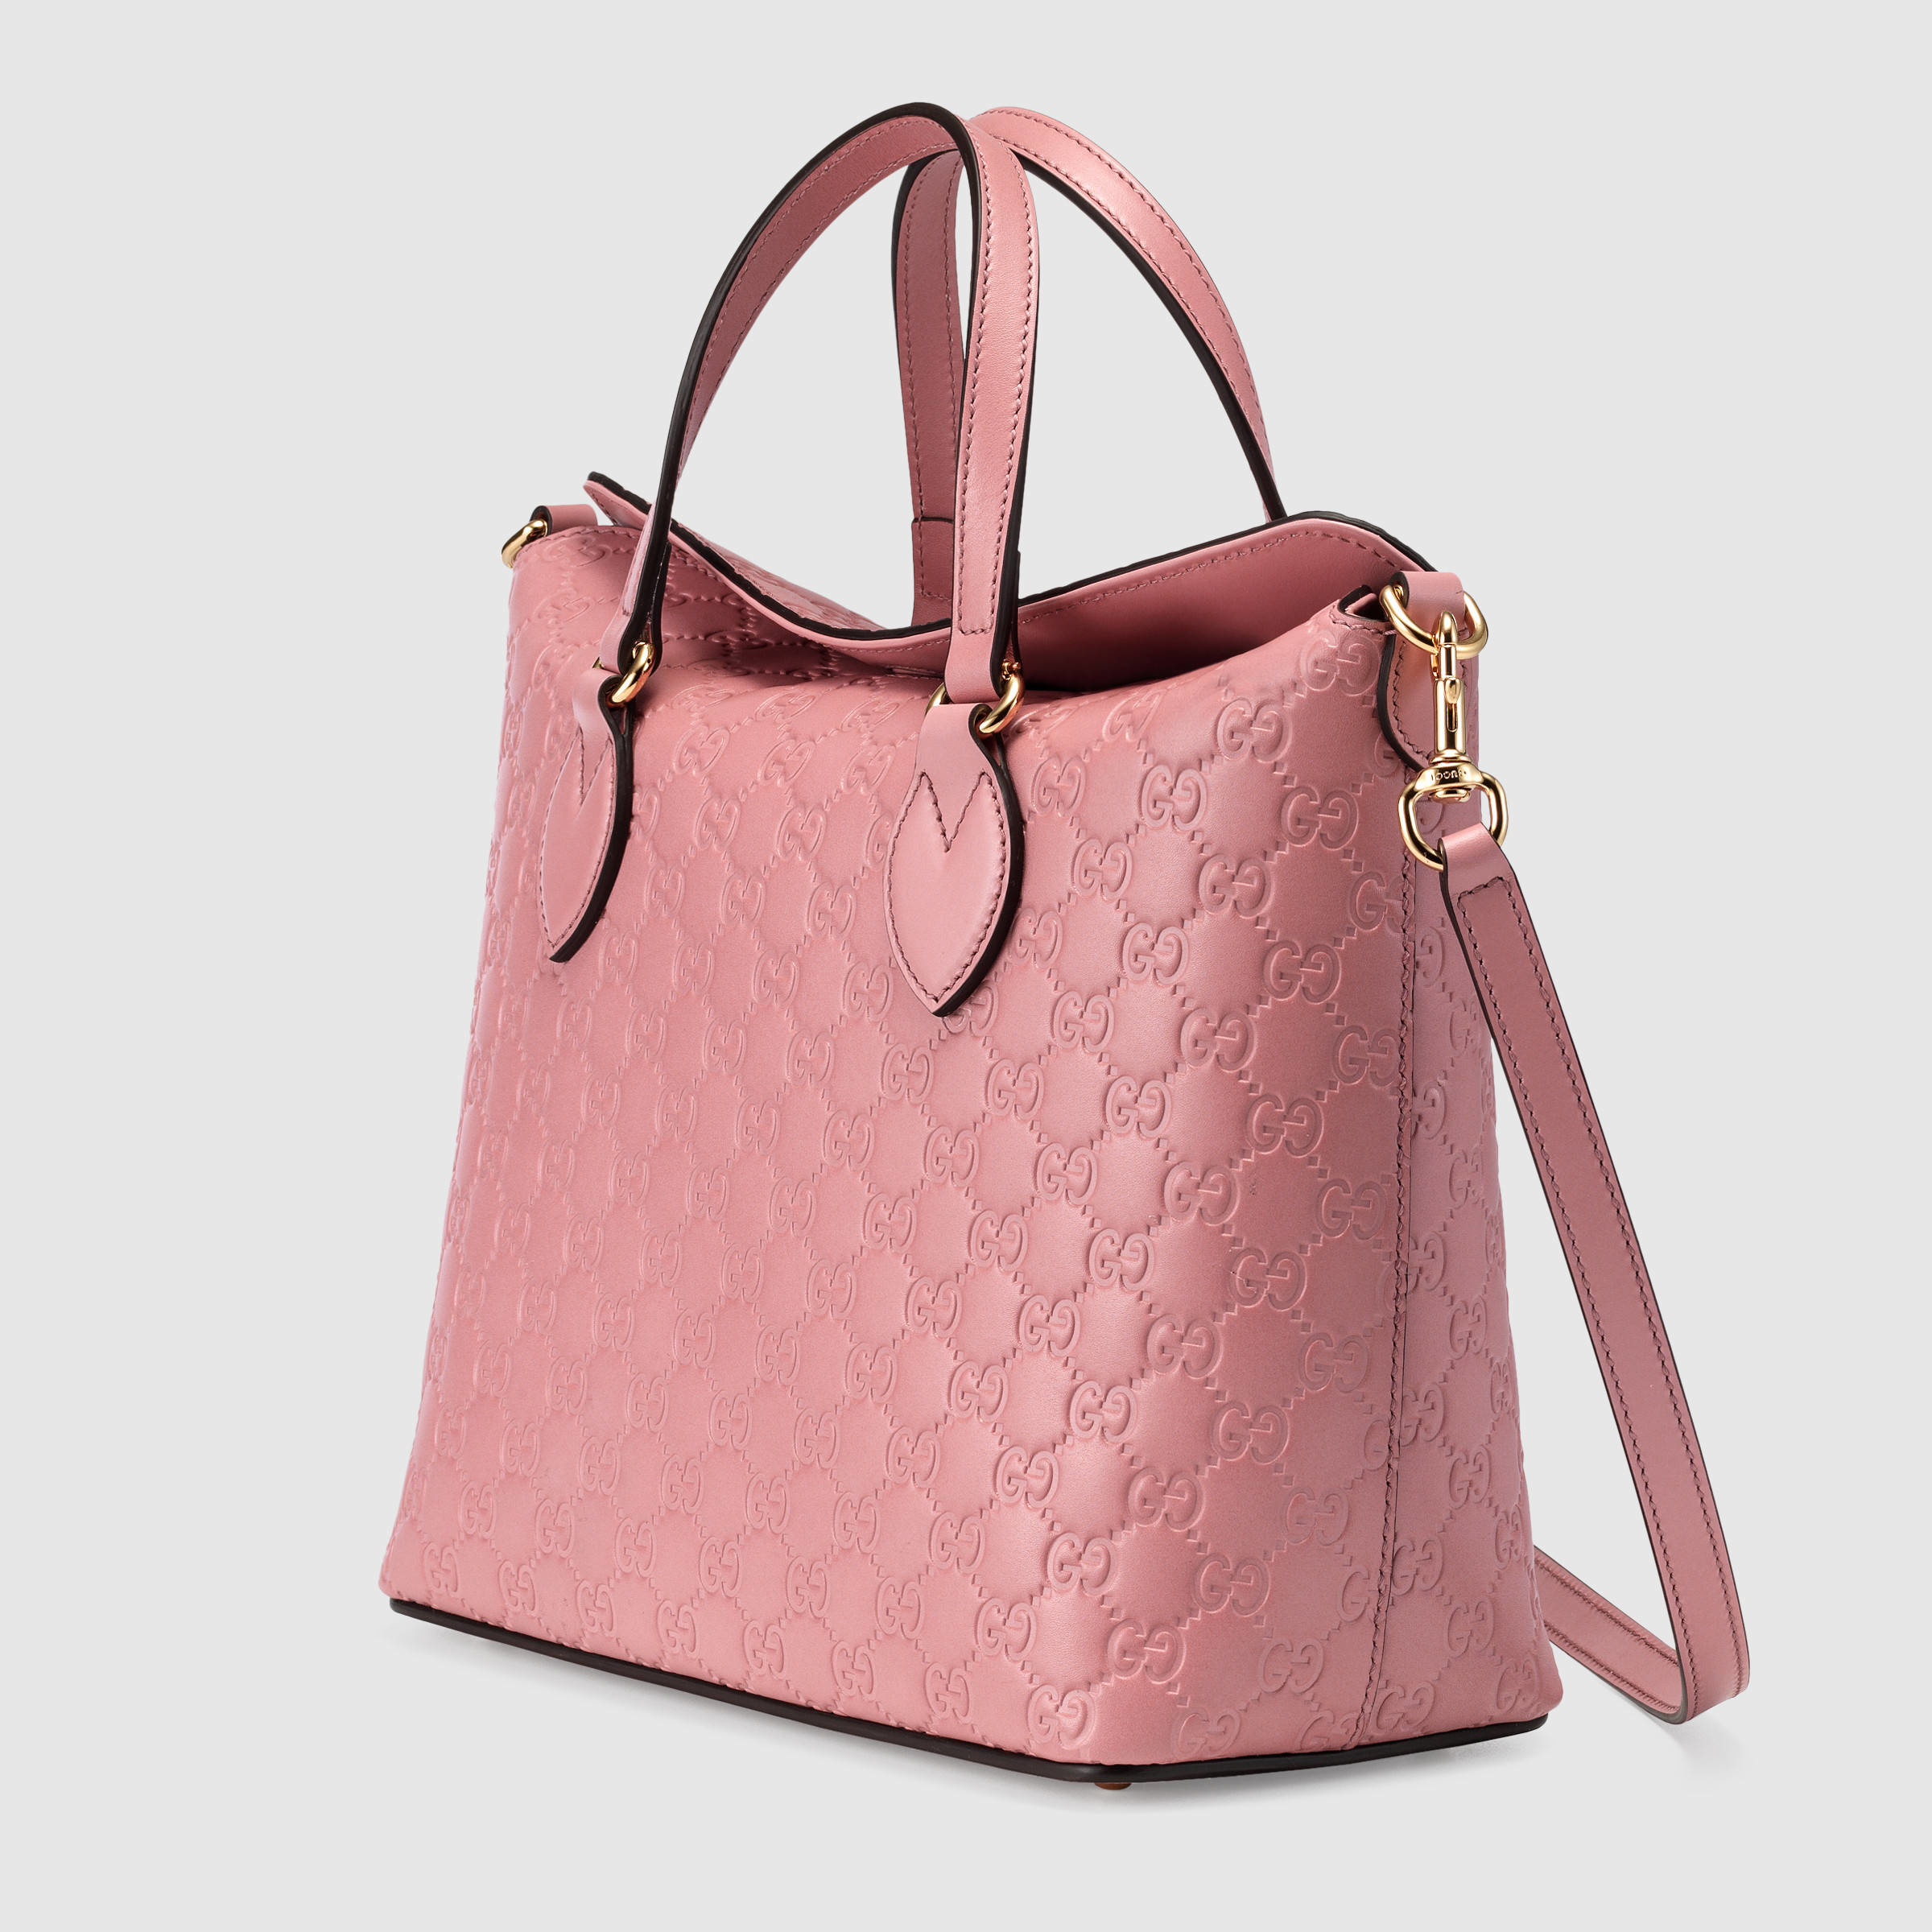 pink gucci tote, OFF 75%,www 